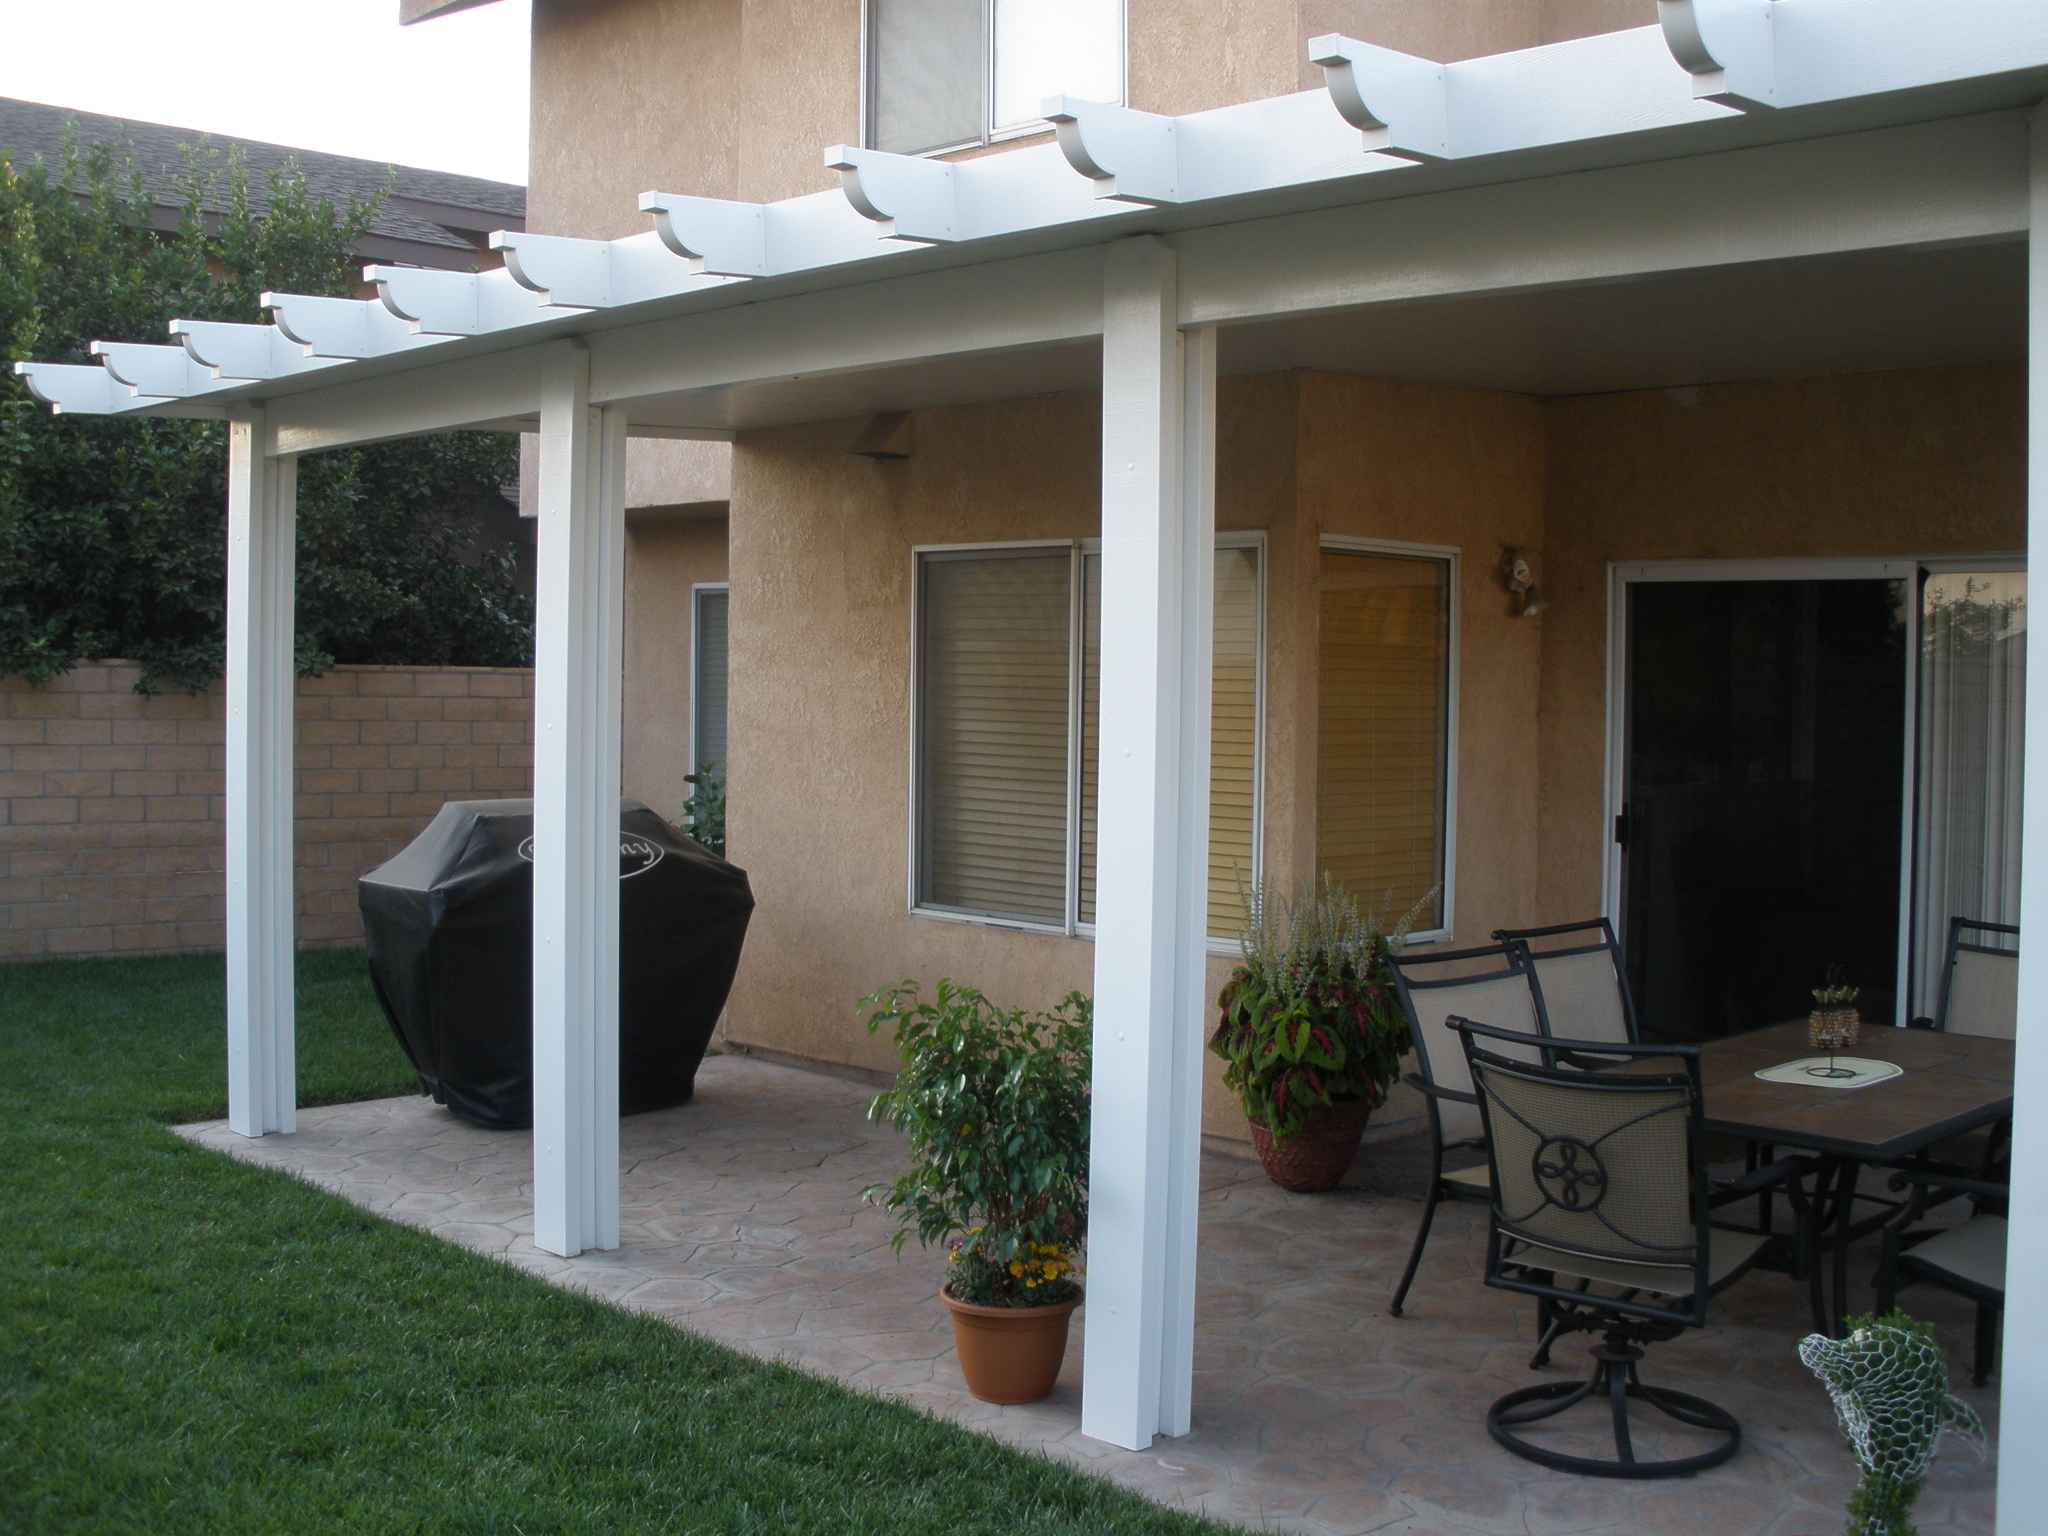 Aluminum Awnings For Patios Awesome Amazing Of Aluminum Patio Cover inside size 2048 X 1536